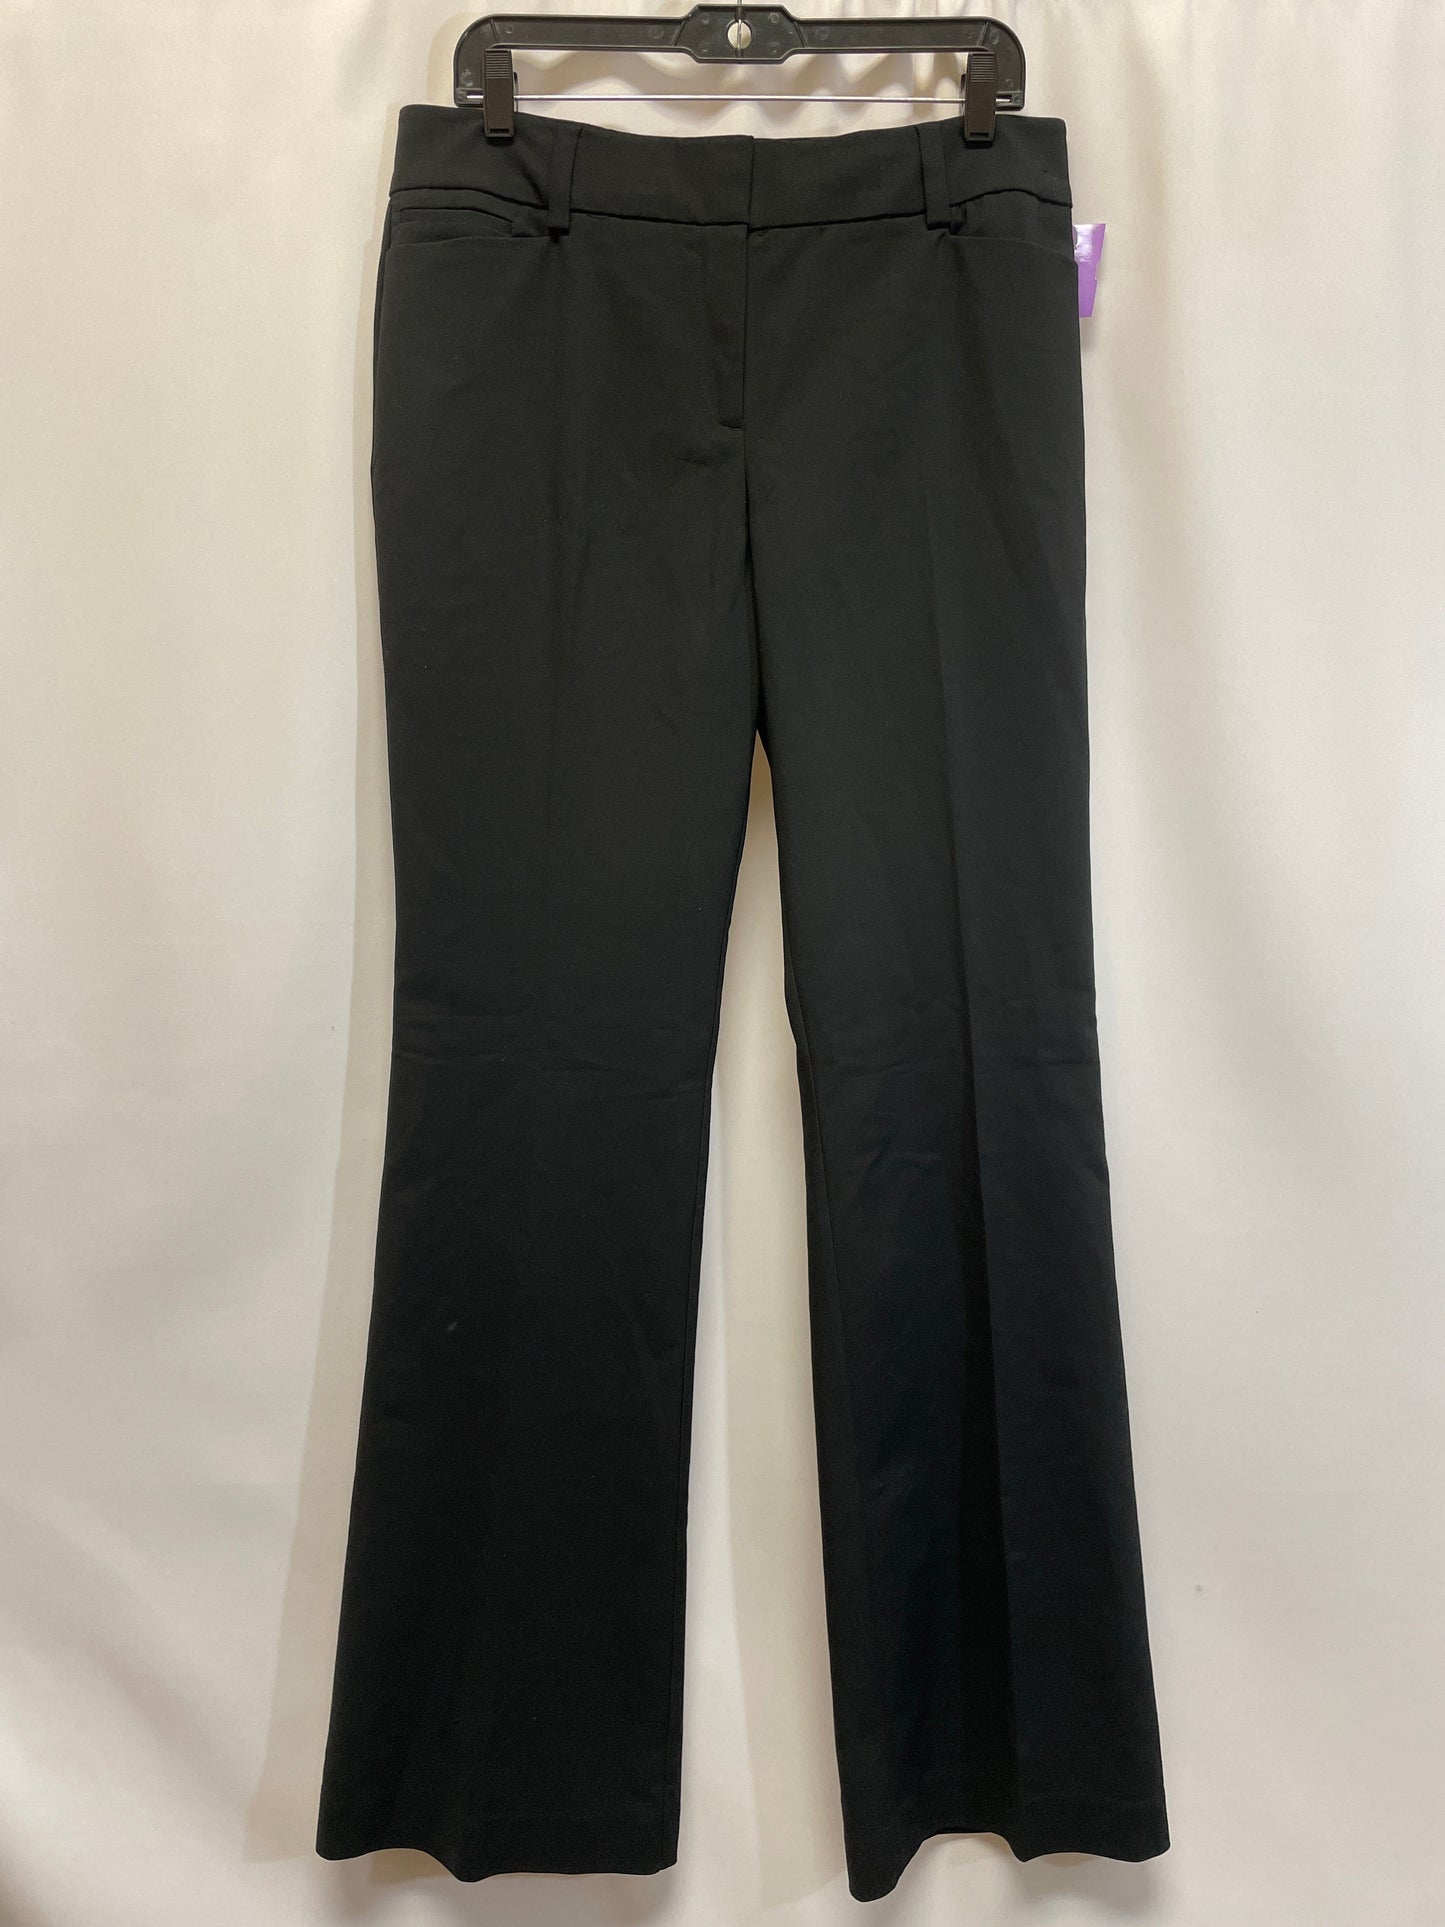 Black Pants Dress New York And Co, Size 10tall